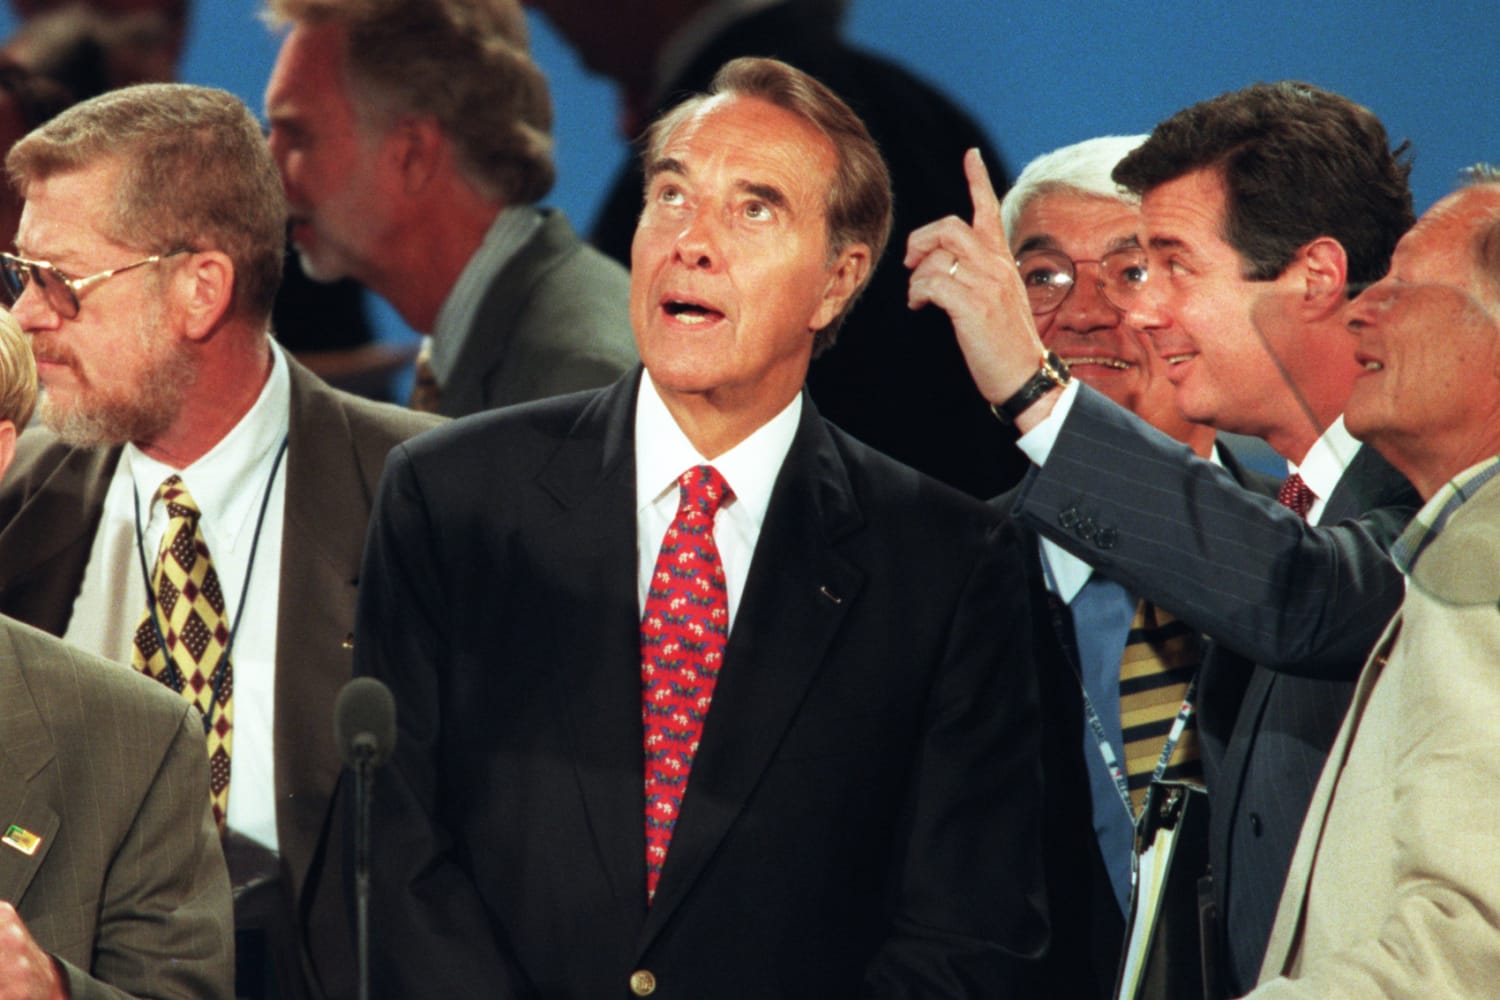 Bob Dole’s biggest impact may have come post-retirement. And not in a good way.